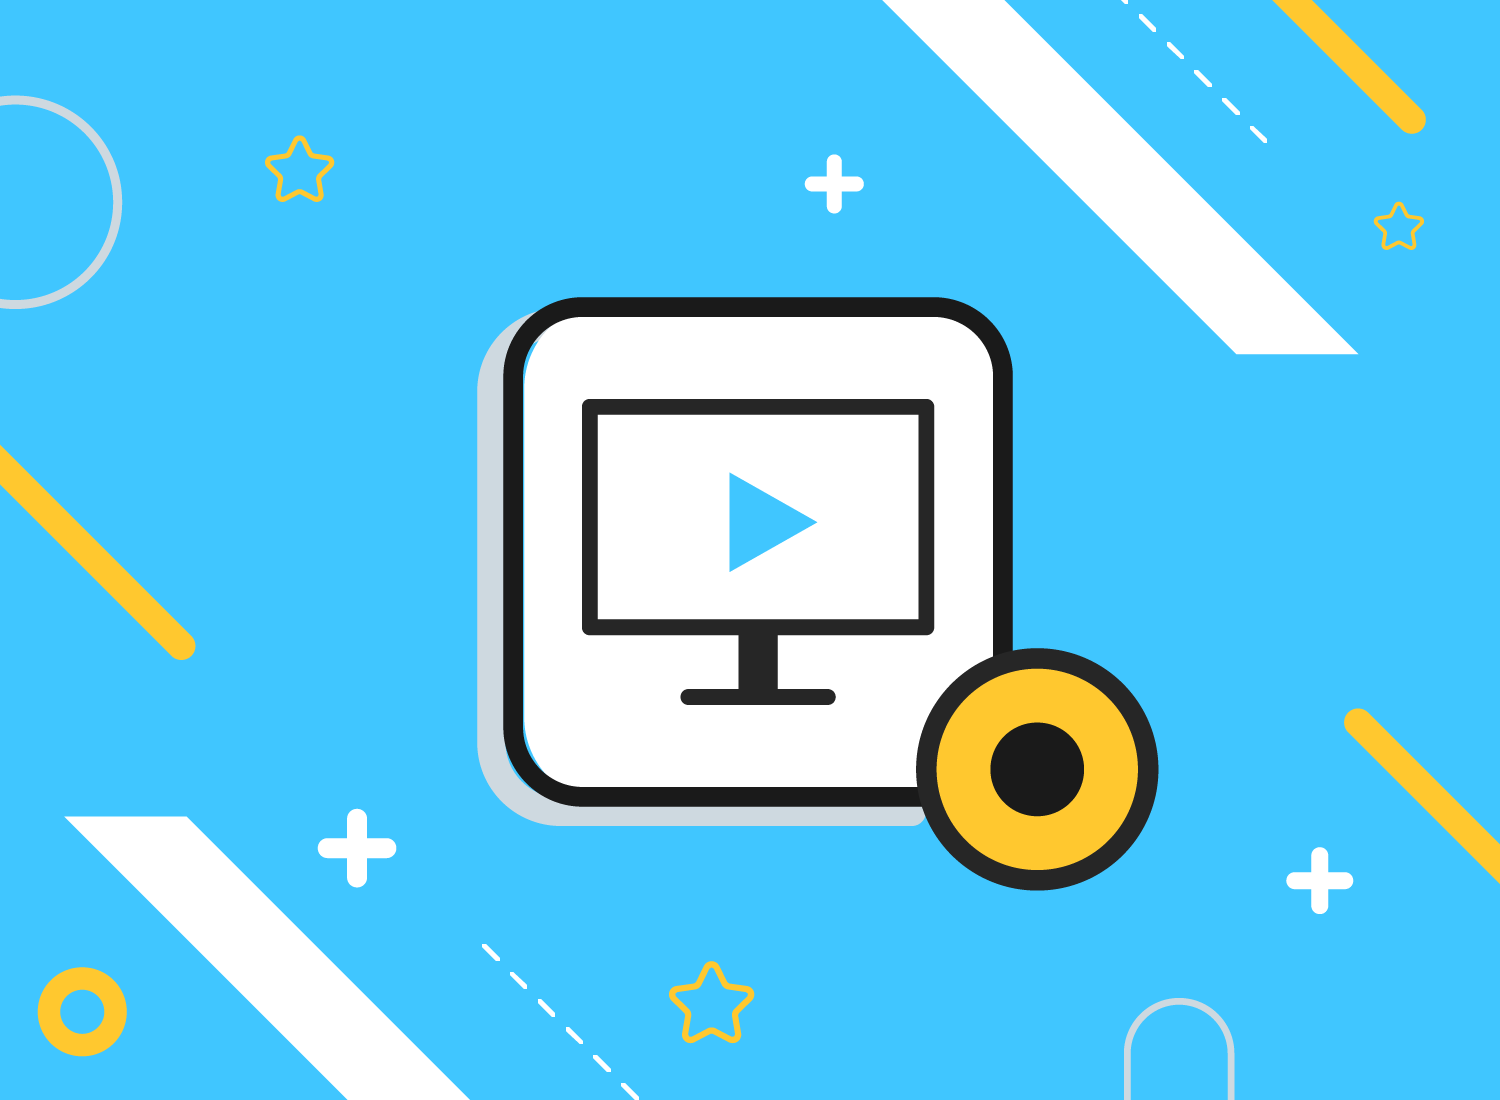 How to Make a Screencast in 5 Easy Steps | The TechSmith Blog